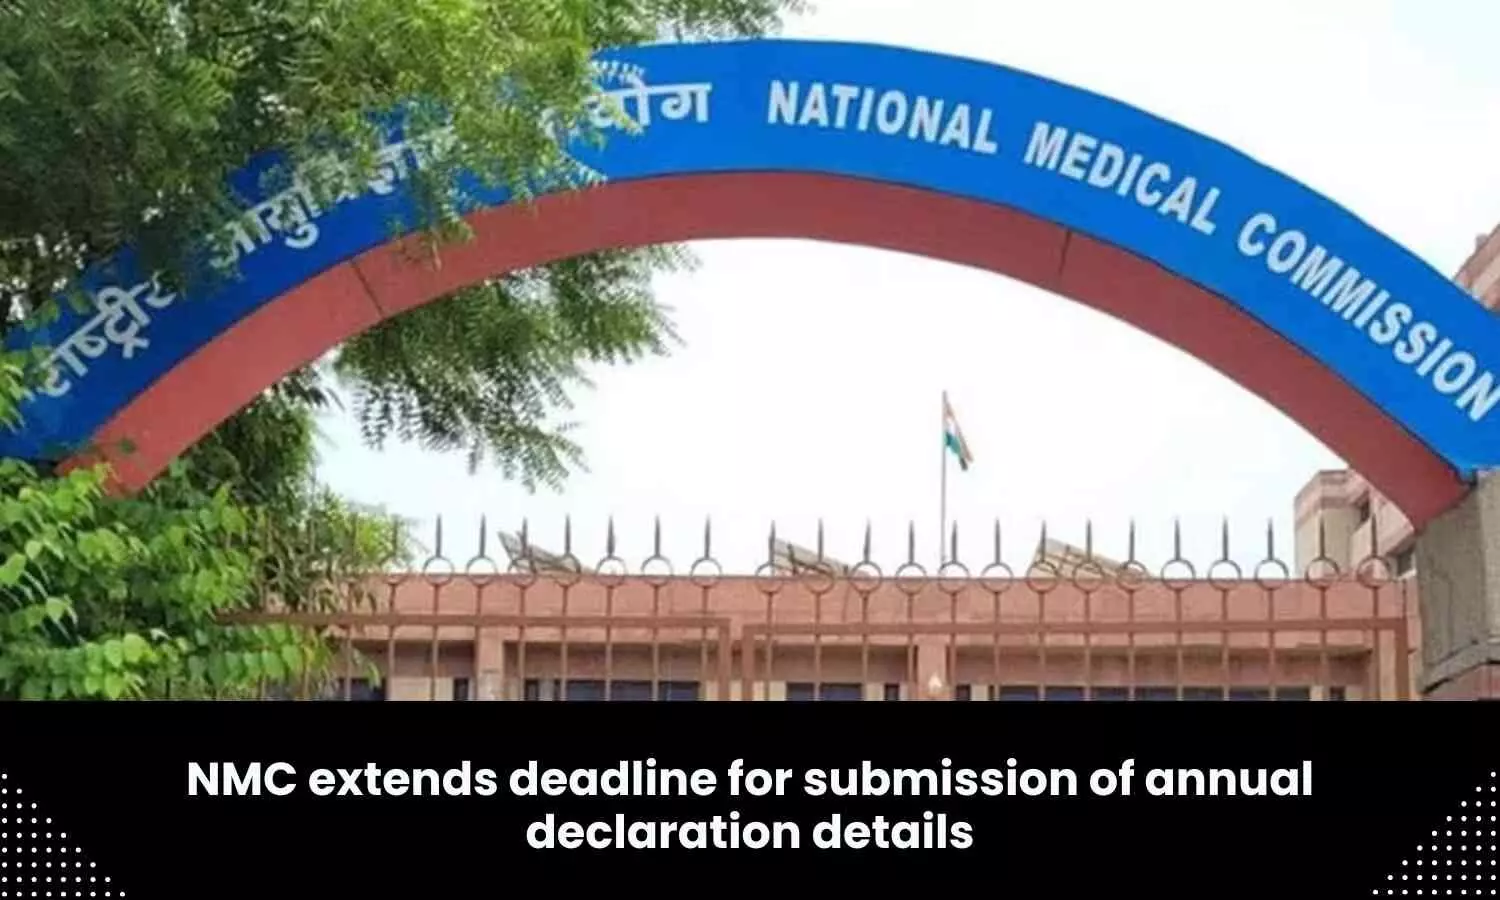 Last date for submission of annual declaration details by medical colleges extended: NMC